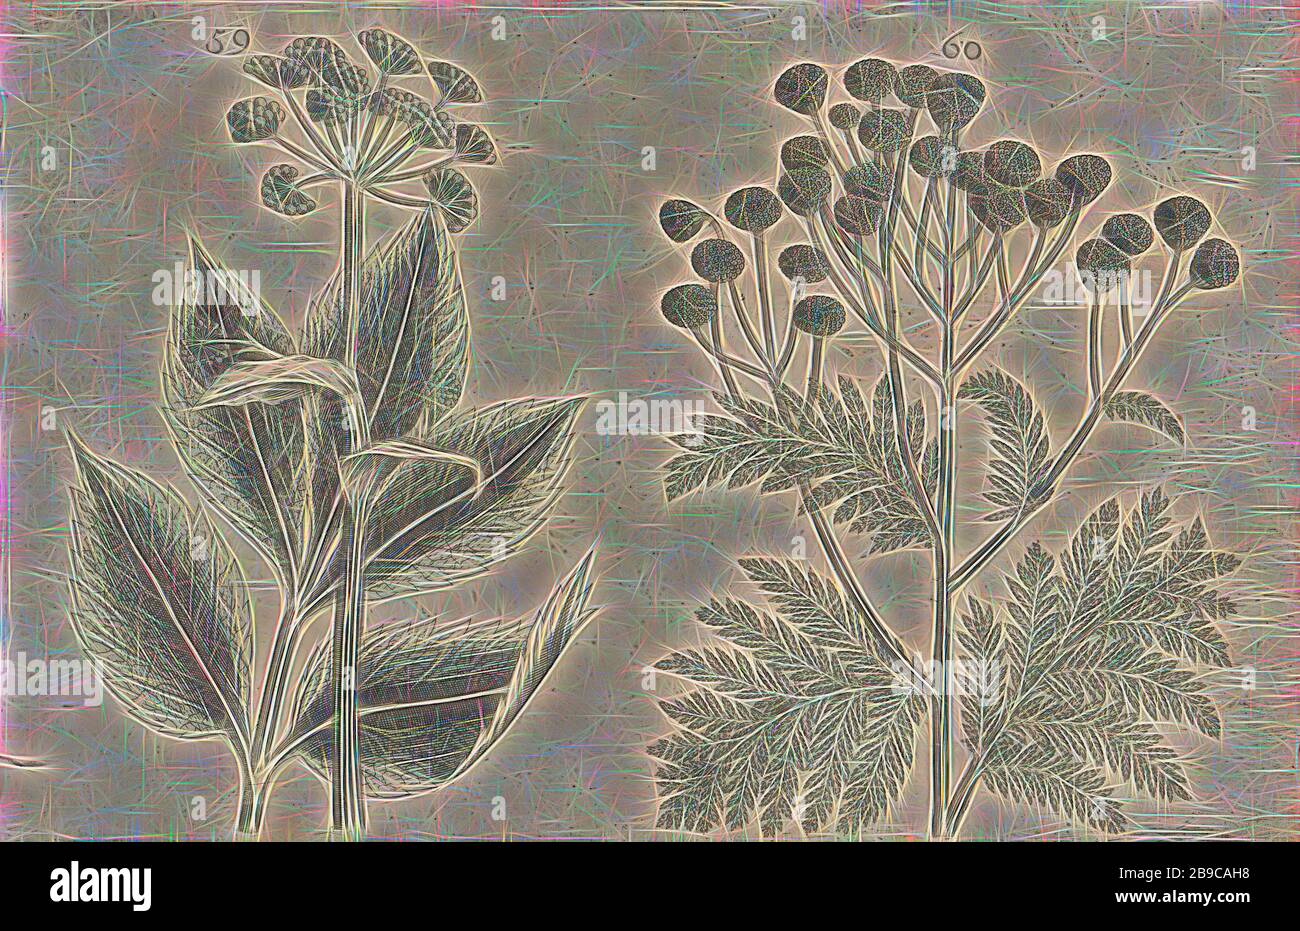 Hart root (Seseli libanotis) and tansy (Tanacetum vulgare), Hart root and tansy FIGs. 59 and 60 on a sheet hand numbered 30. In: Anselmi Boetii de Boot I.C. Brugensis & Rodolphi II. Imp. Novel. medici a cubiculis Florum, Herbarum, ac fructuum selectiorum icones, & vires pleraeque hactenus ignotÃ¦. Part of the album with sheets and plates from De Boodts herbarium from 1640. The twelfth of twelve albums with watercolors of animals, birds and plants known around 1600, commissioned by Emperor Rudolf II, anonymous, 1604 - 1632 and/or 1640, paper, ink, watercolor (paint), engraving, h 135 mm Ã— w 20 Stock Photo